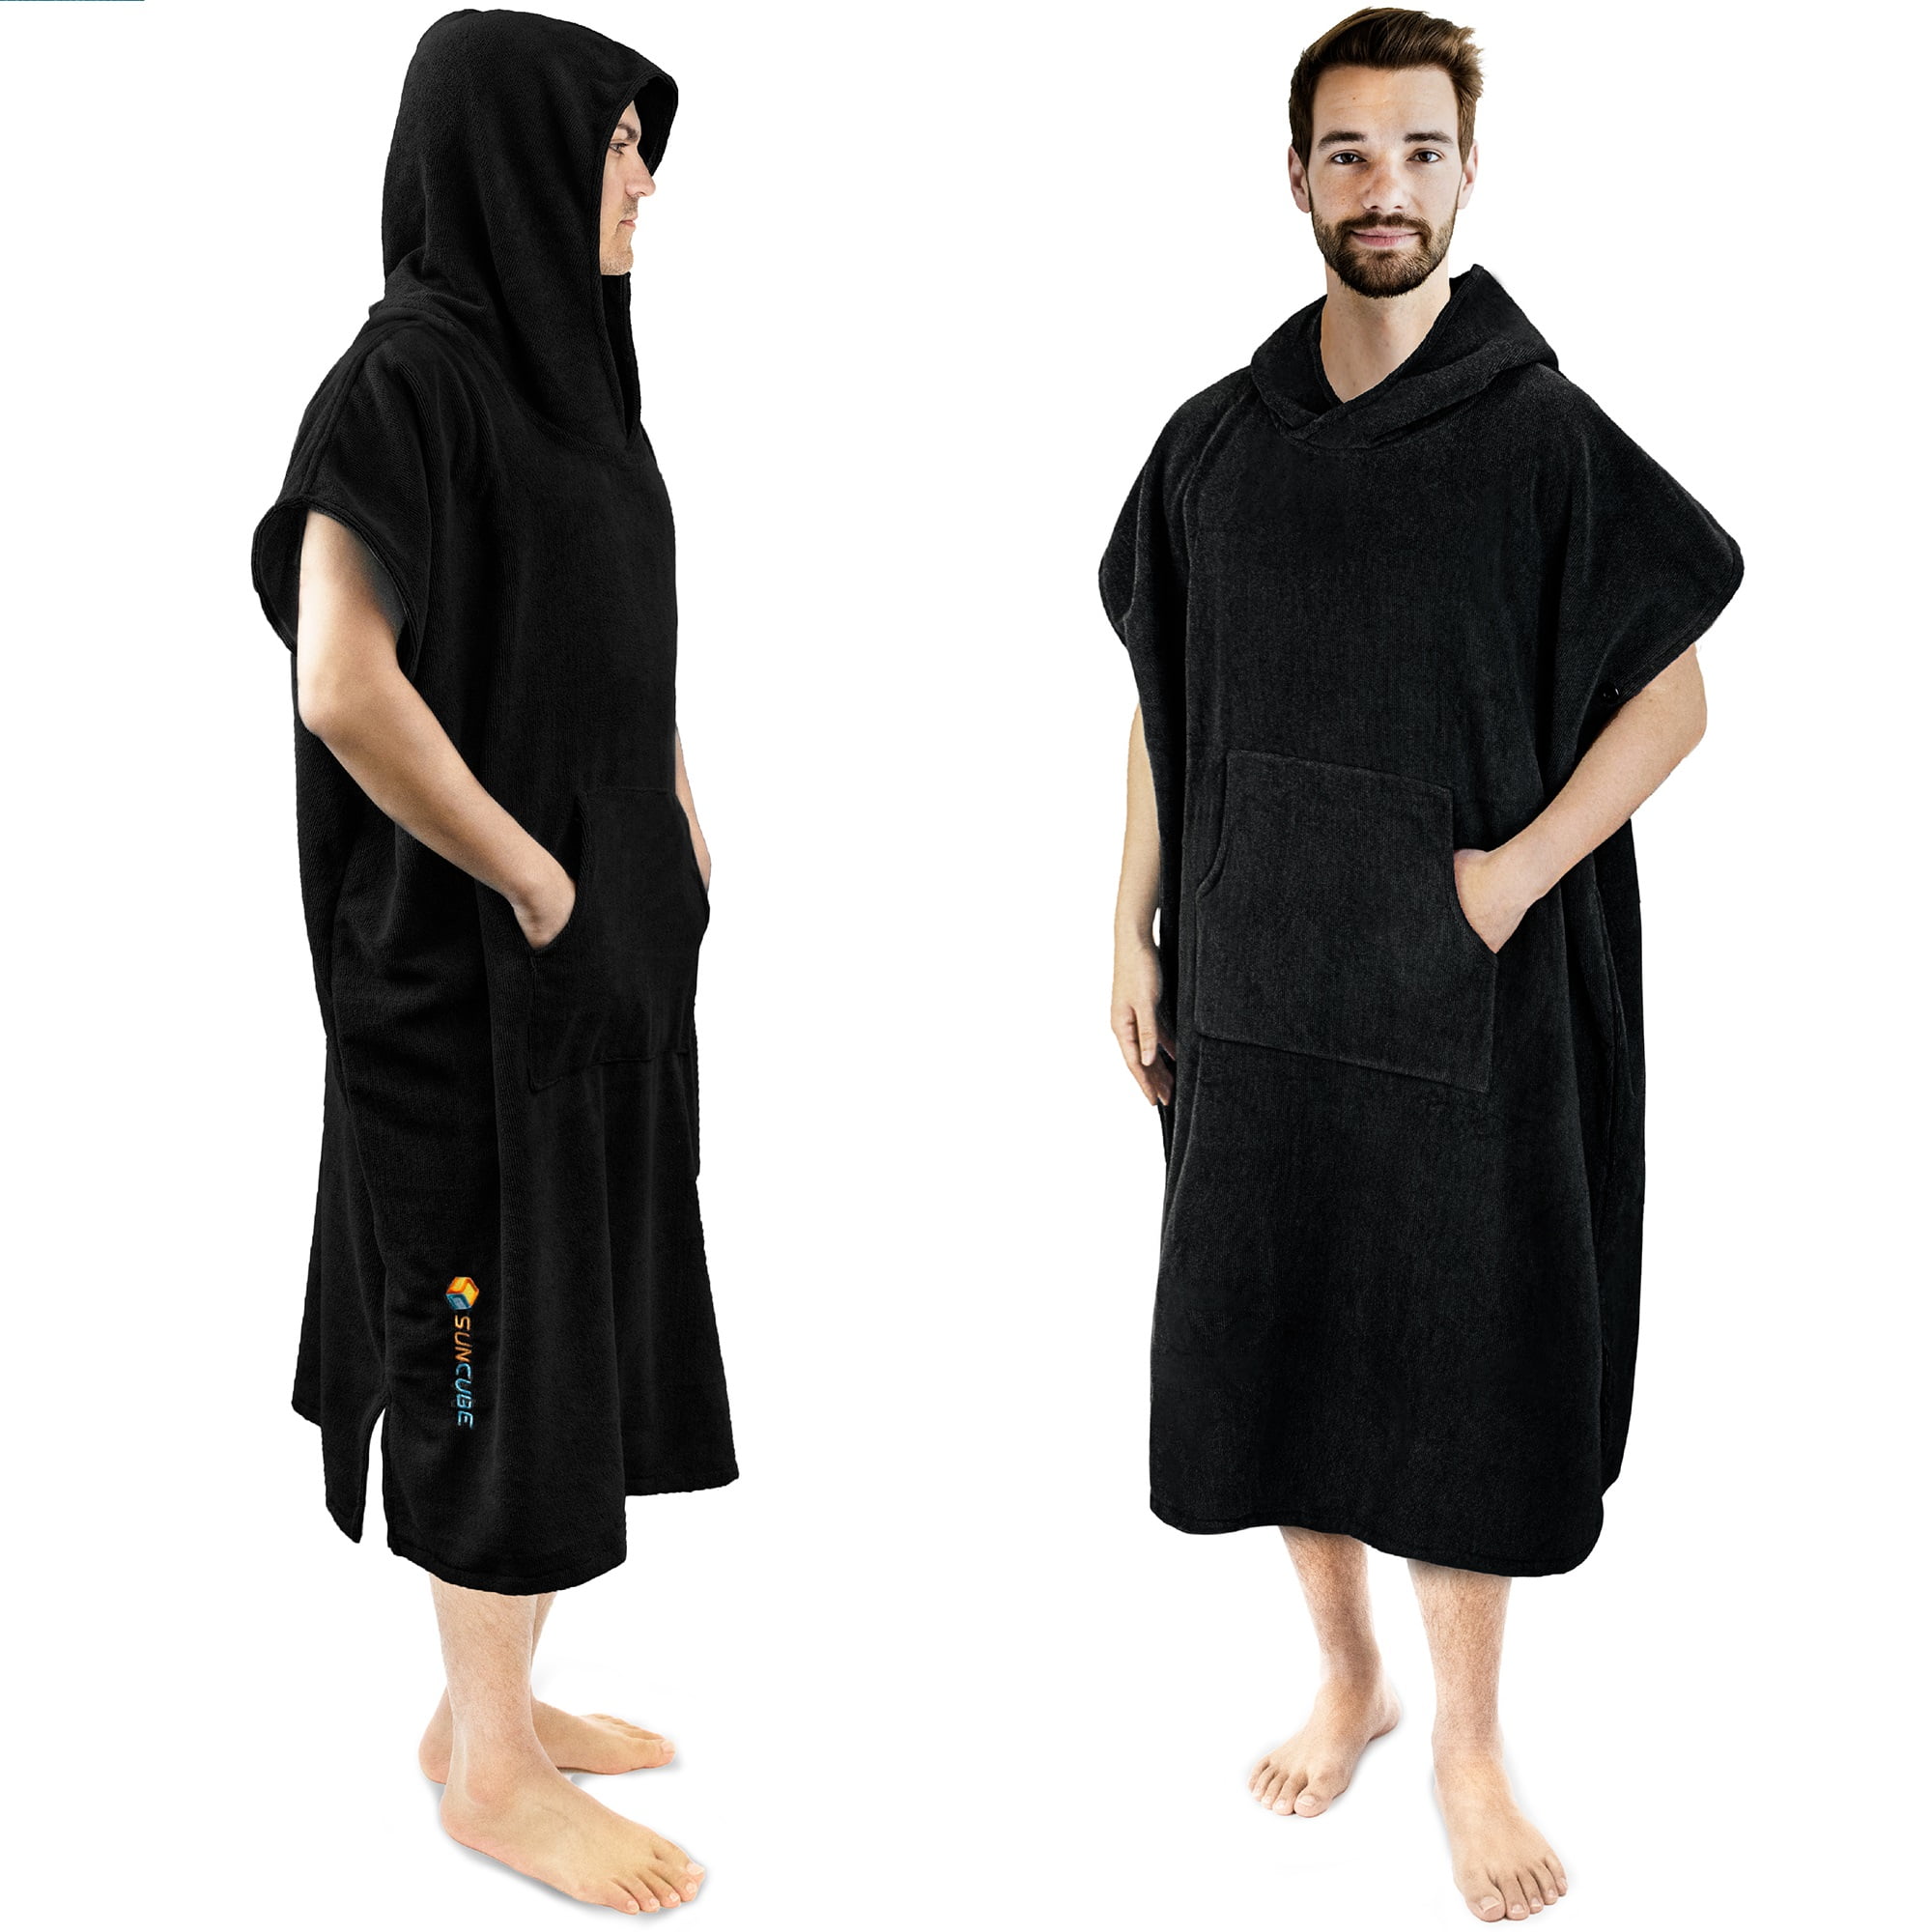 SURF* BEACH* UNISEX HOODED OUTDOOR CHANGING ROBE 100% COTTON TOWELLING SPORTS 